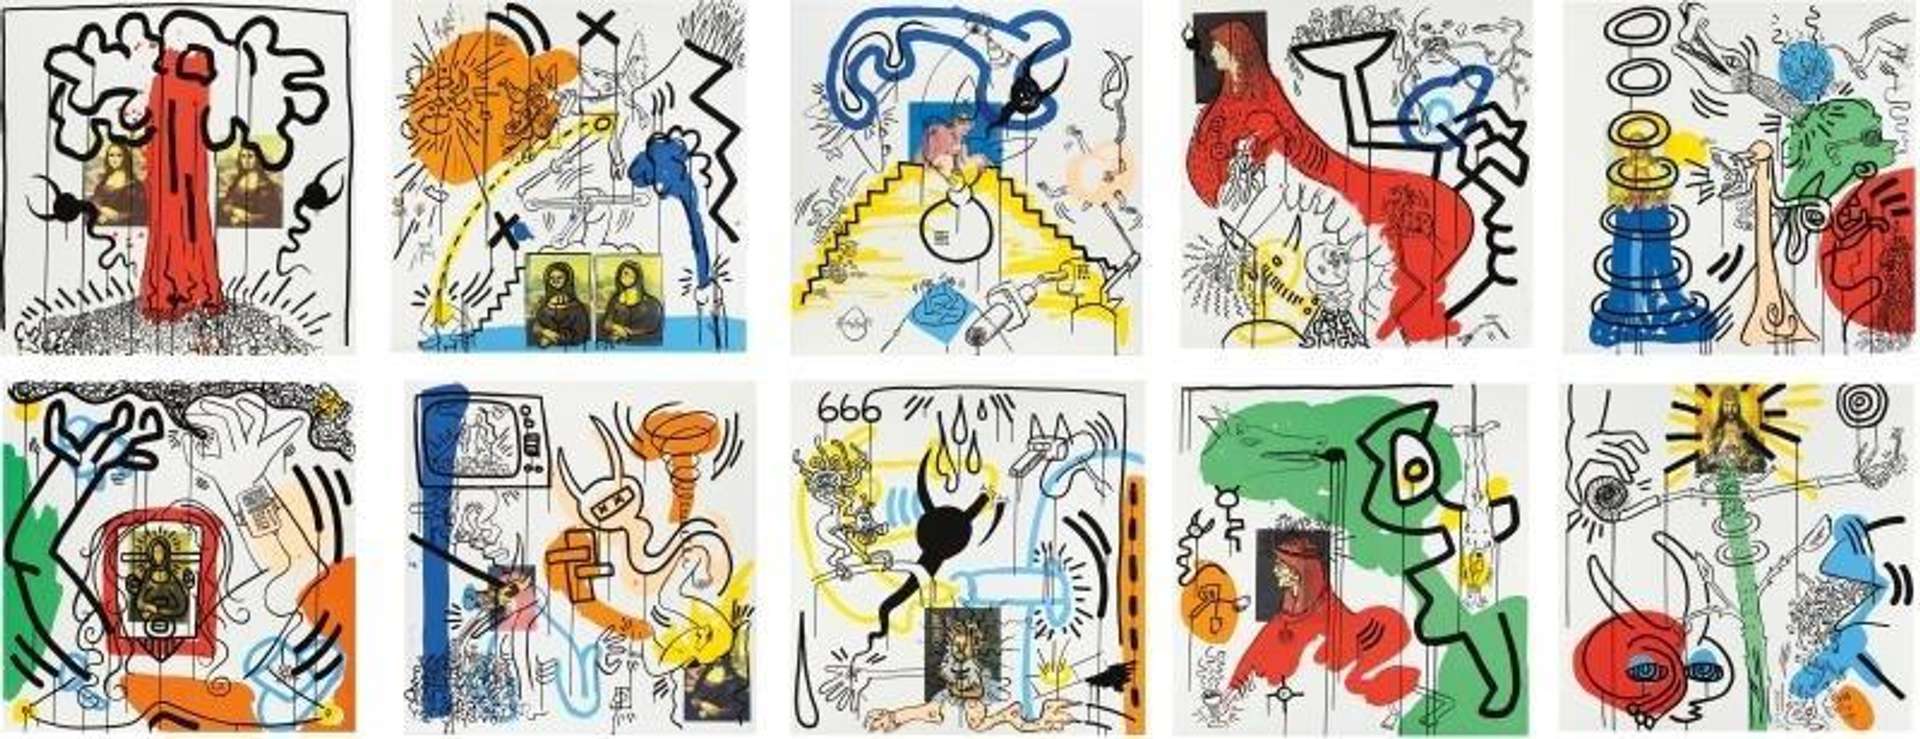 Apocalypse (complete set) by Keith Haring